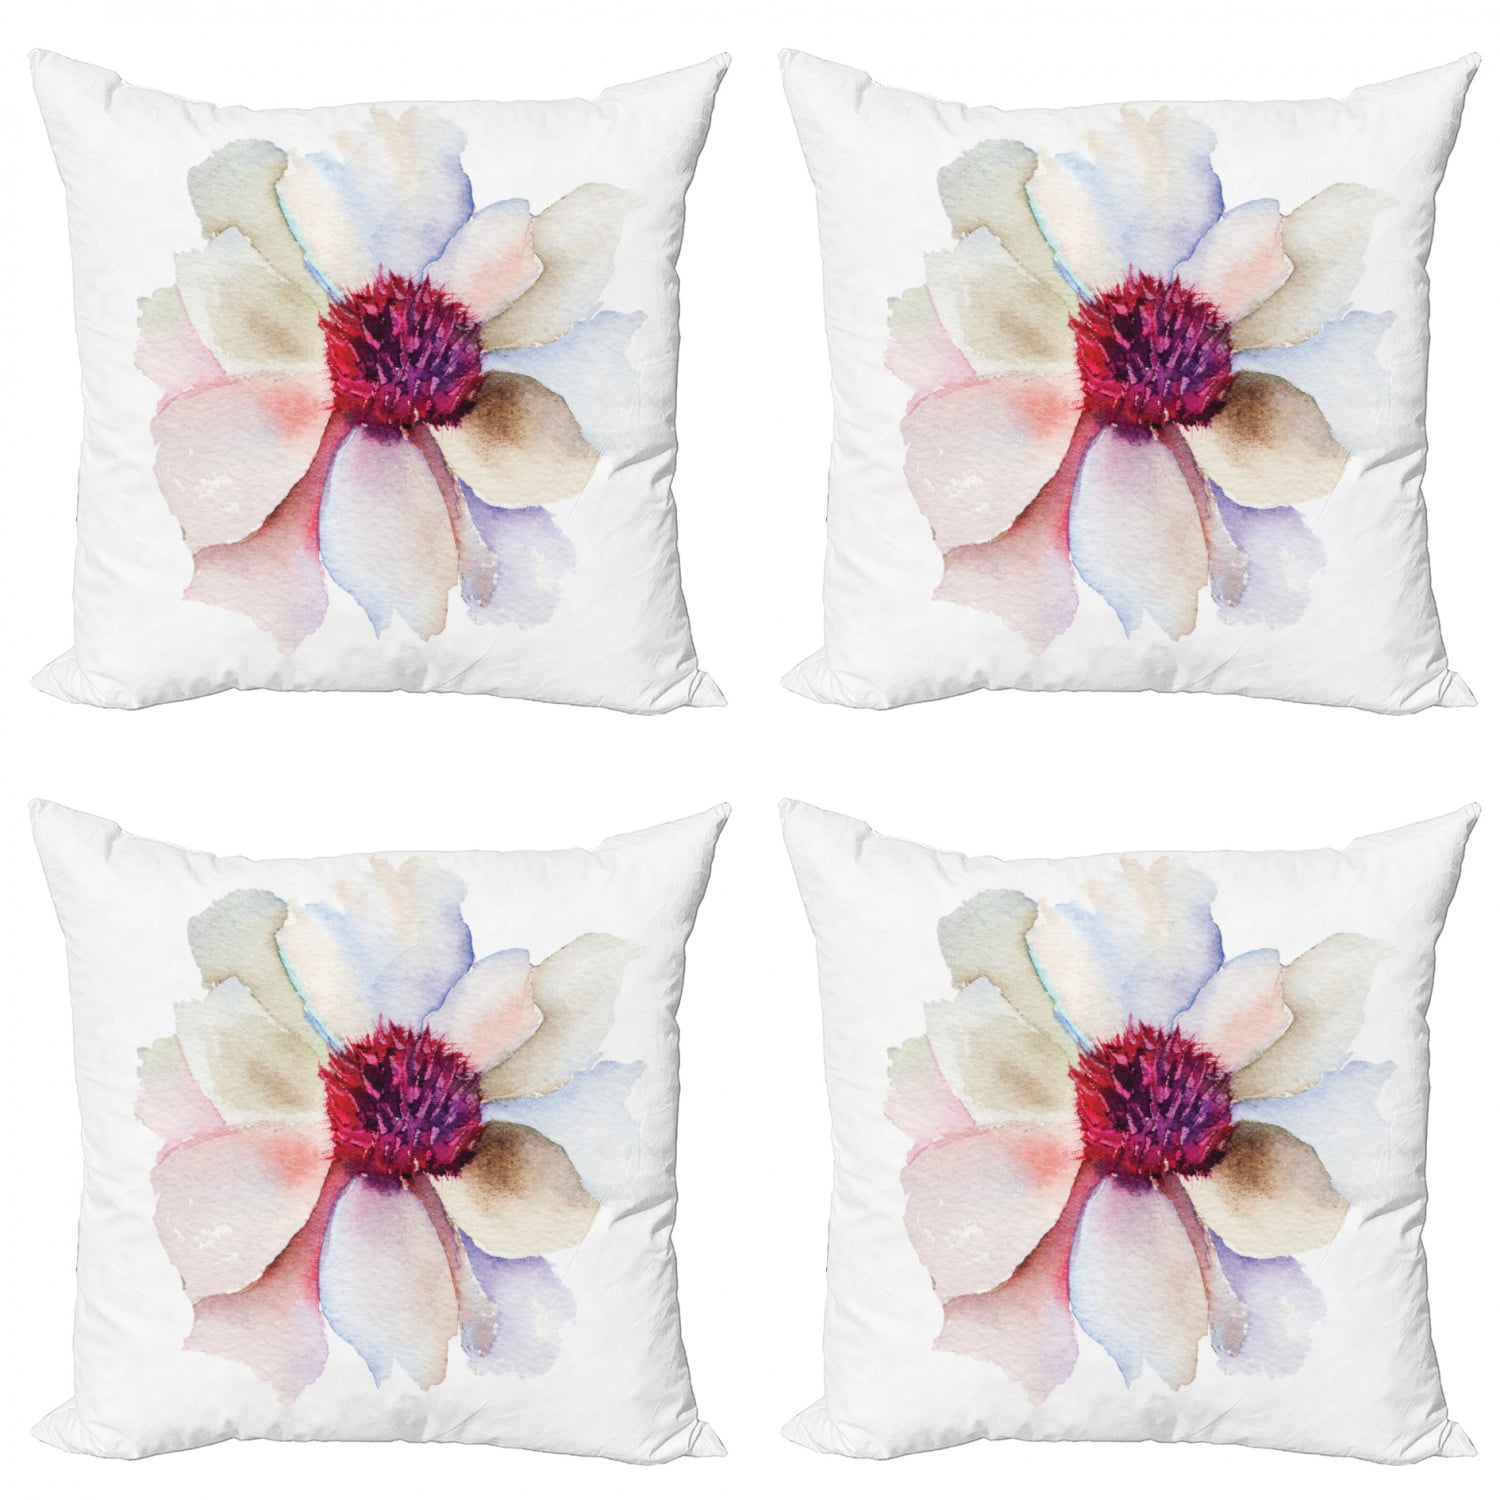 Bouquets of Blooming Rose Flowers Leaves and Buds Spring Season Ambesonne Summer Pink Decorative Throw Pillow Case Pack of 4 Cushion Cover for Couch Living Room Car Baby Blue and Lime Green 16 